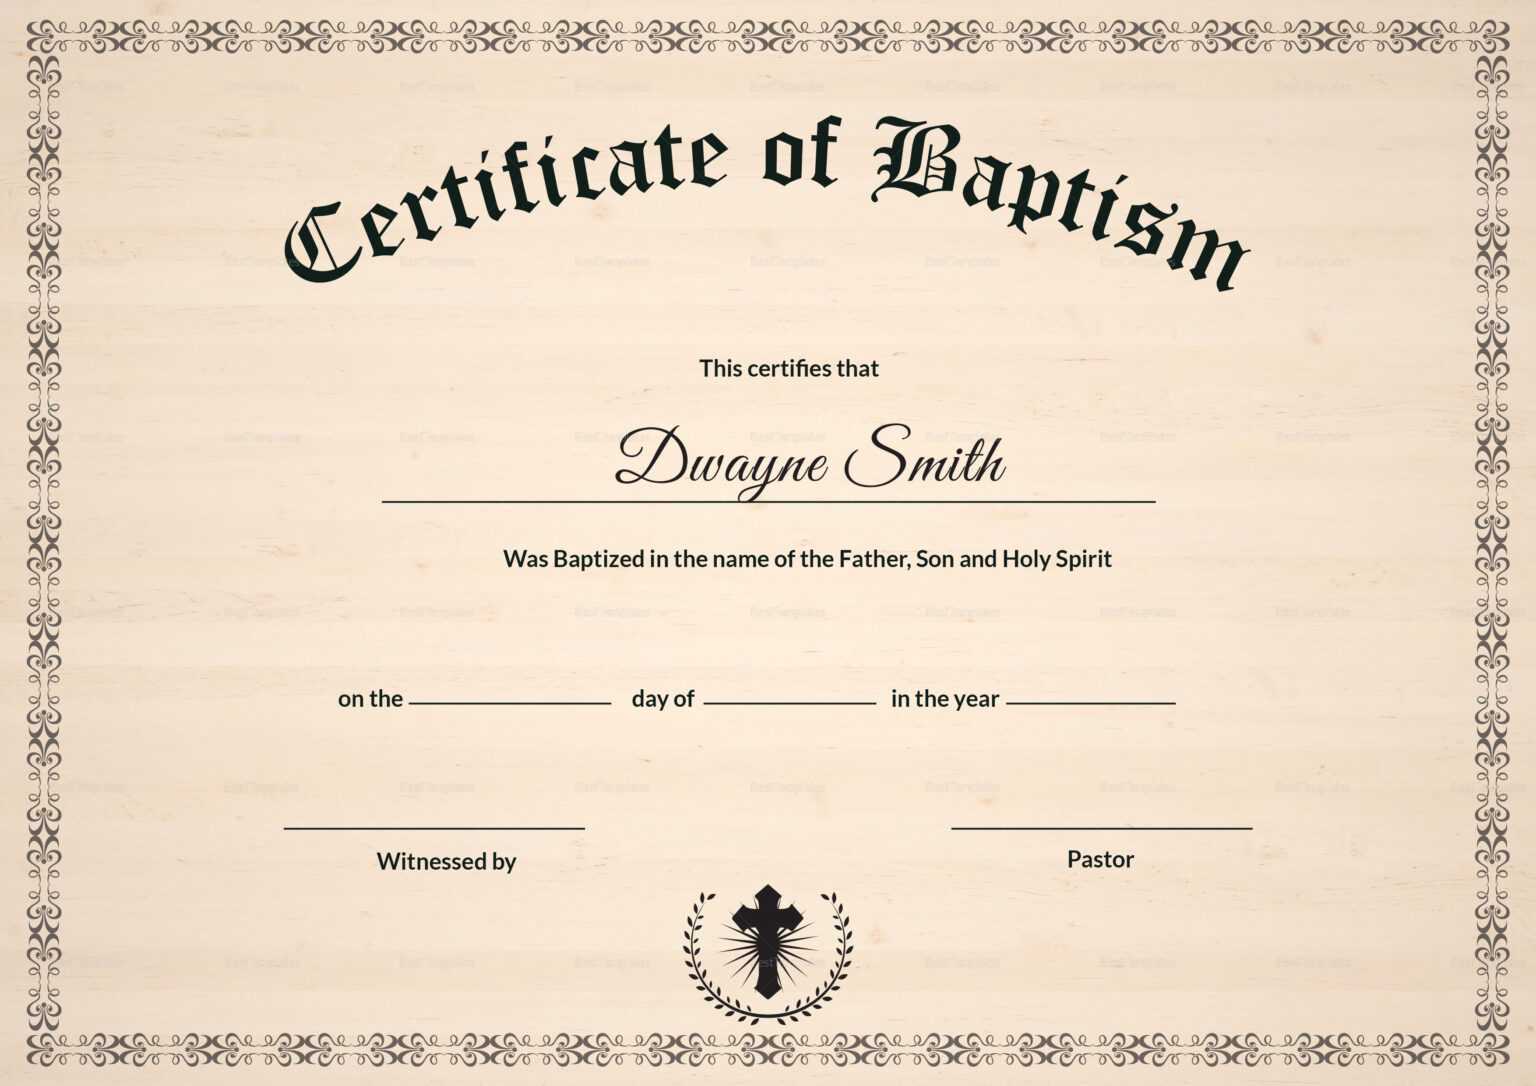 001 Certificate Of Baptism Template Unique Ideas Catholic In Christian Baptism Certificate